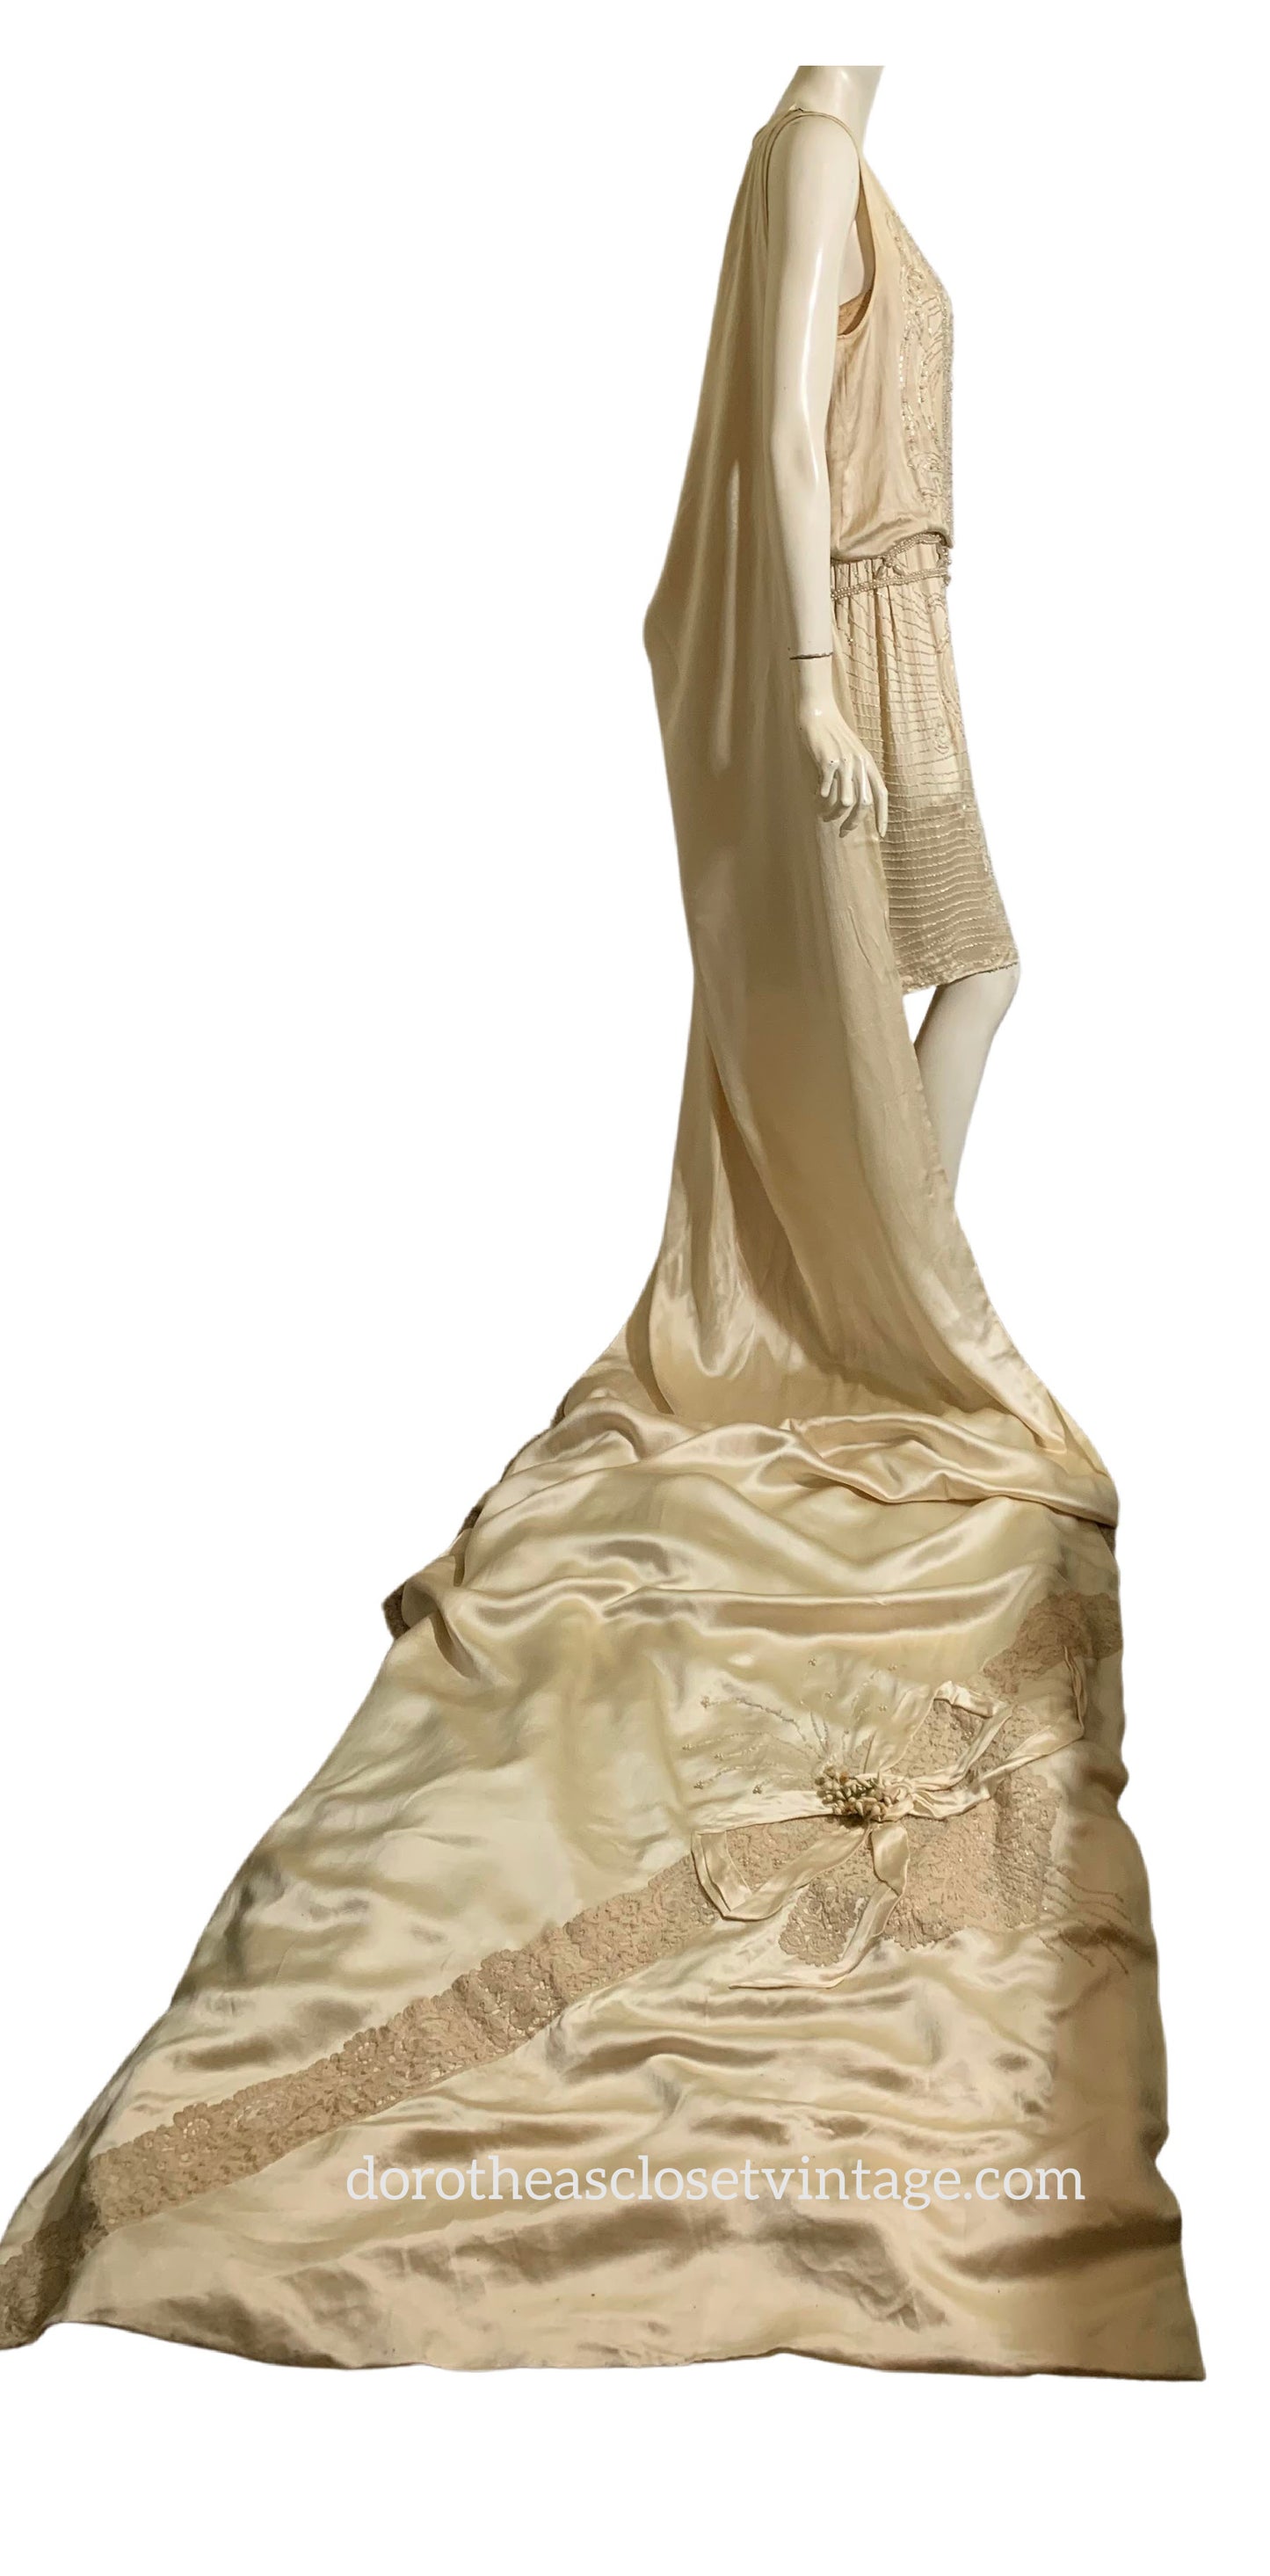 Glamorous Beaded Candlelight Silk Wedding Dress with Court Train, Headpieces, Fan, Shoes and Bible circa 1920s